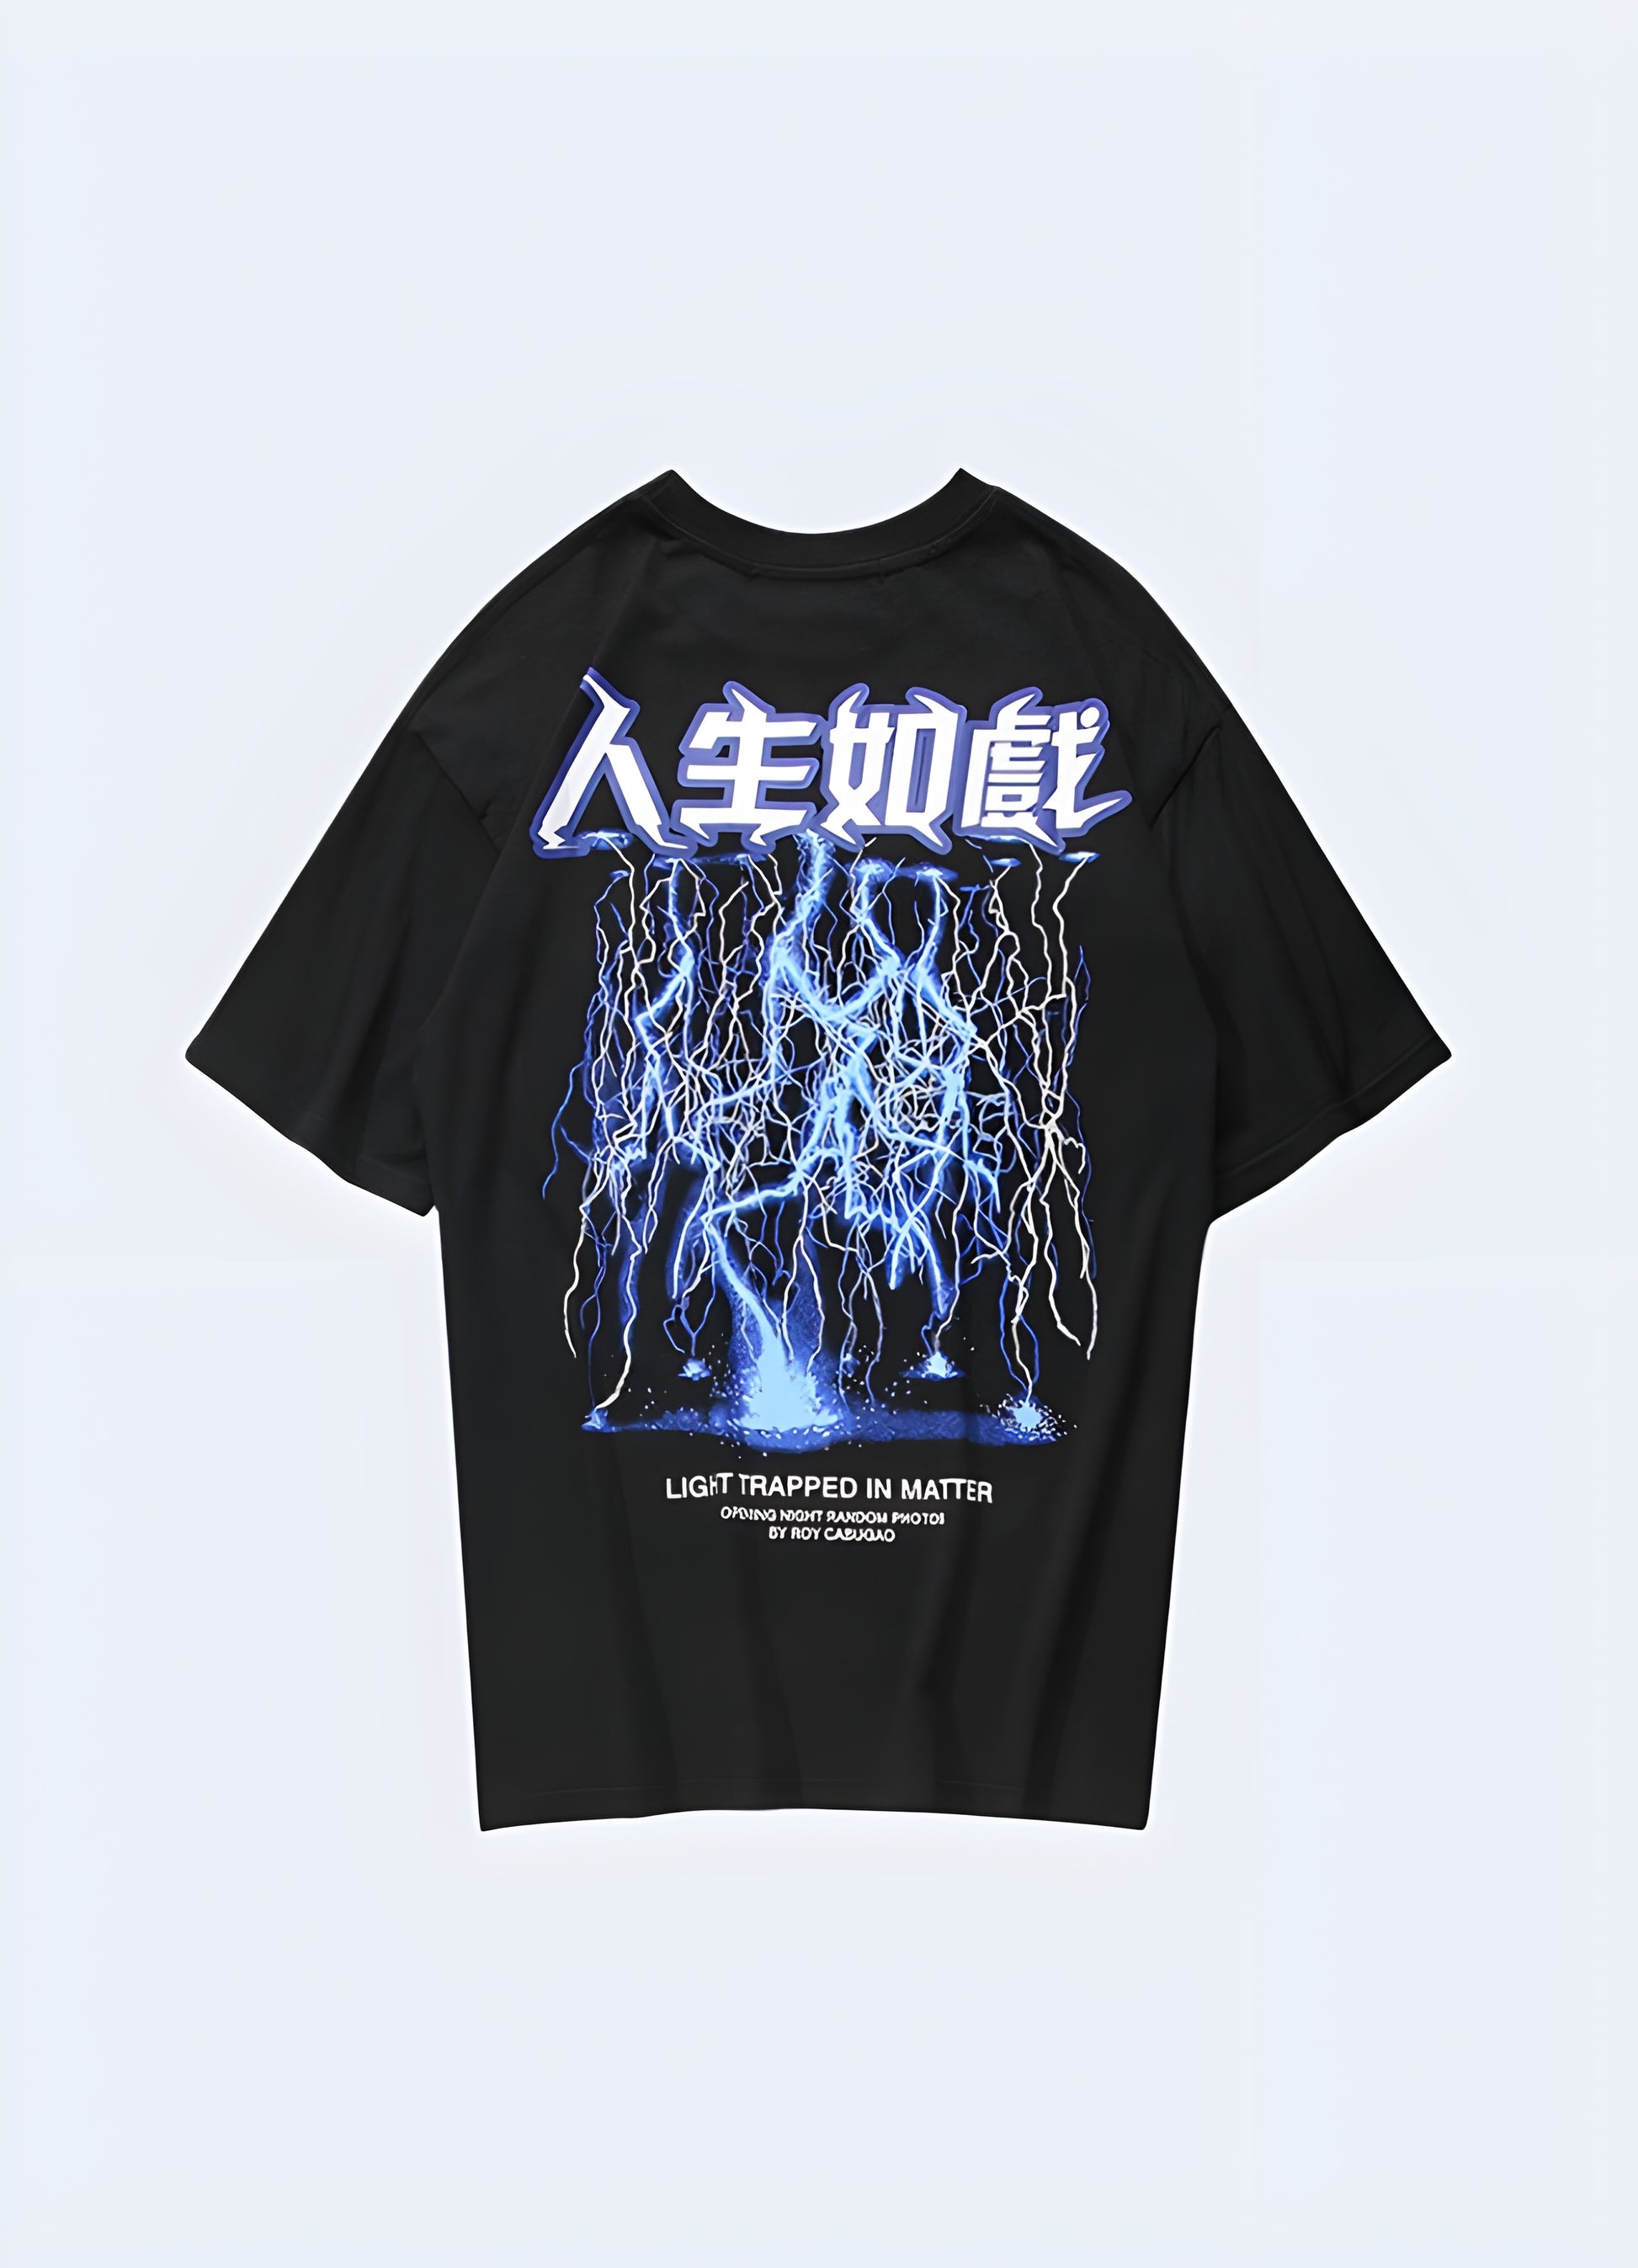 Unveiling a design spectacle, the back of this t-shirt lights up with a radiant shower of blue lightning bolts.